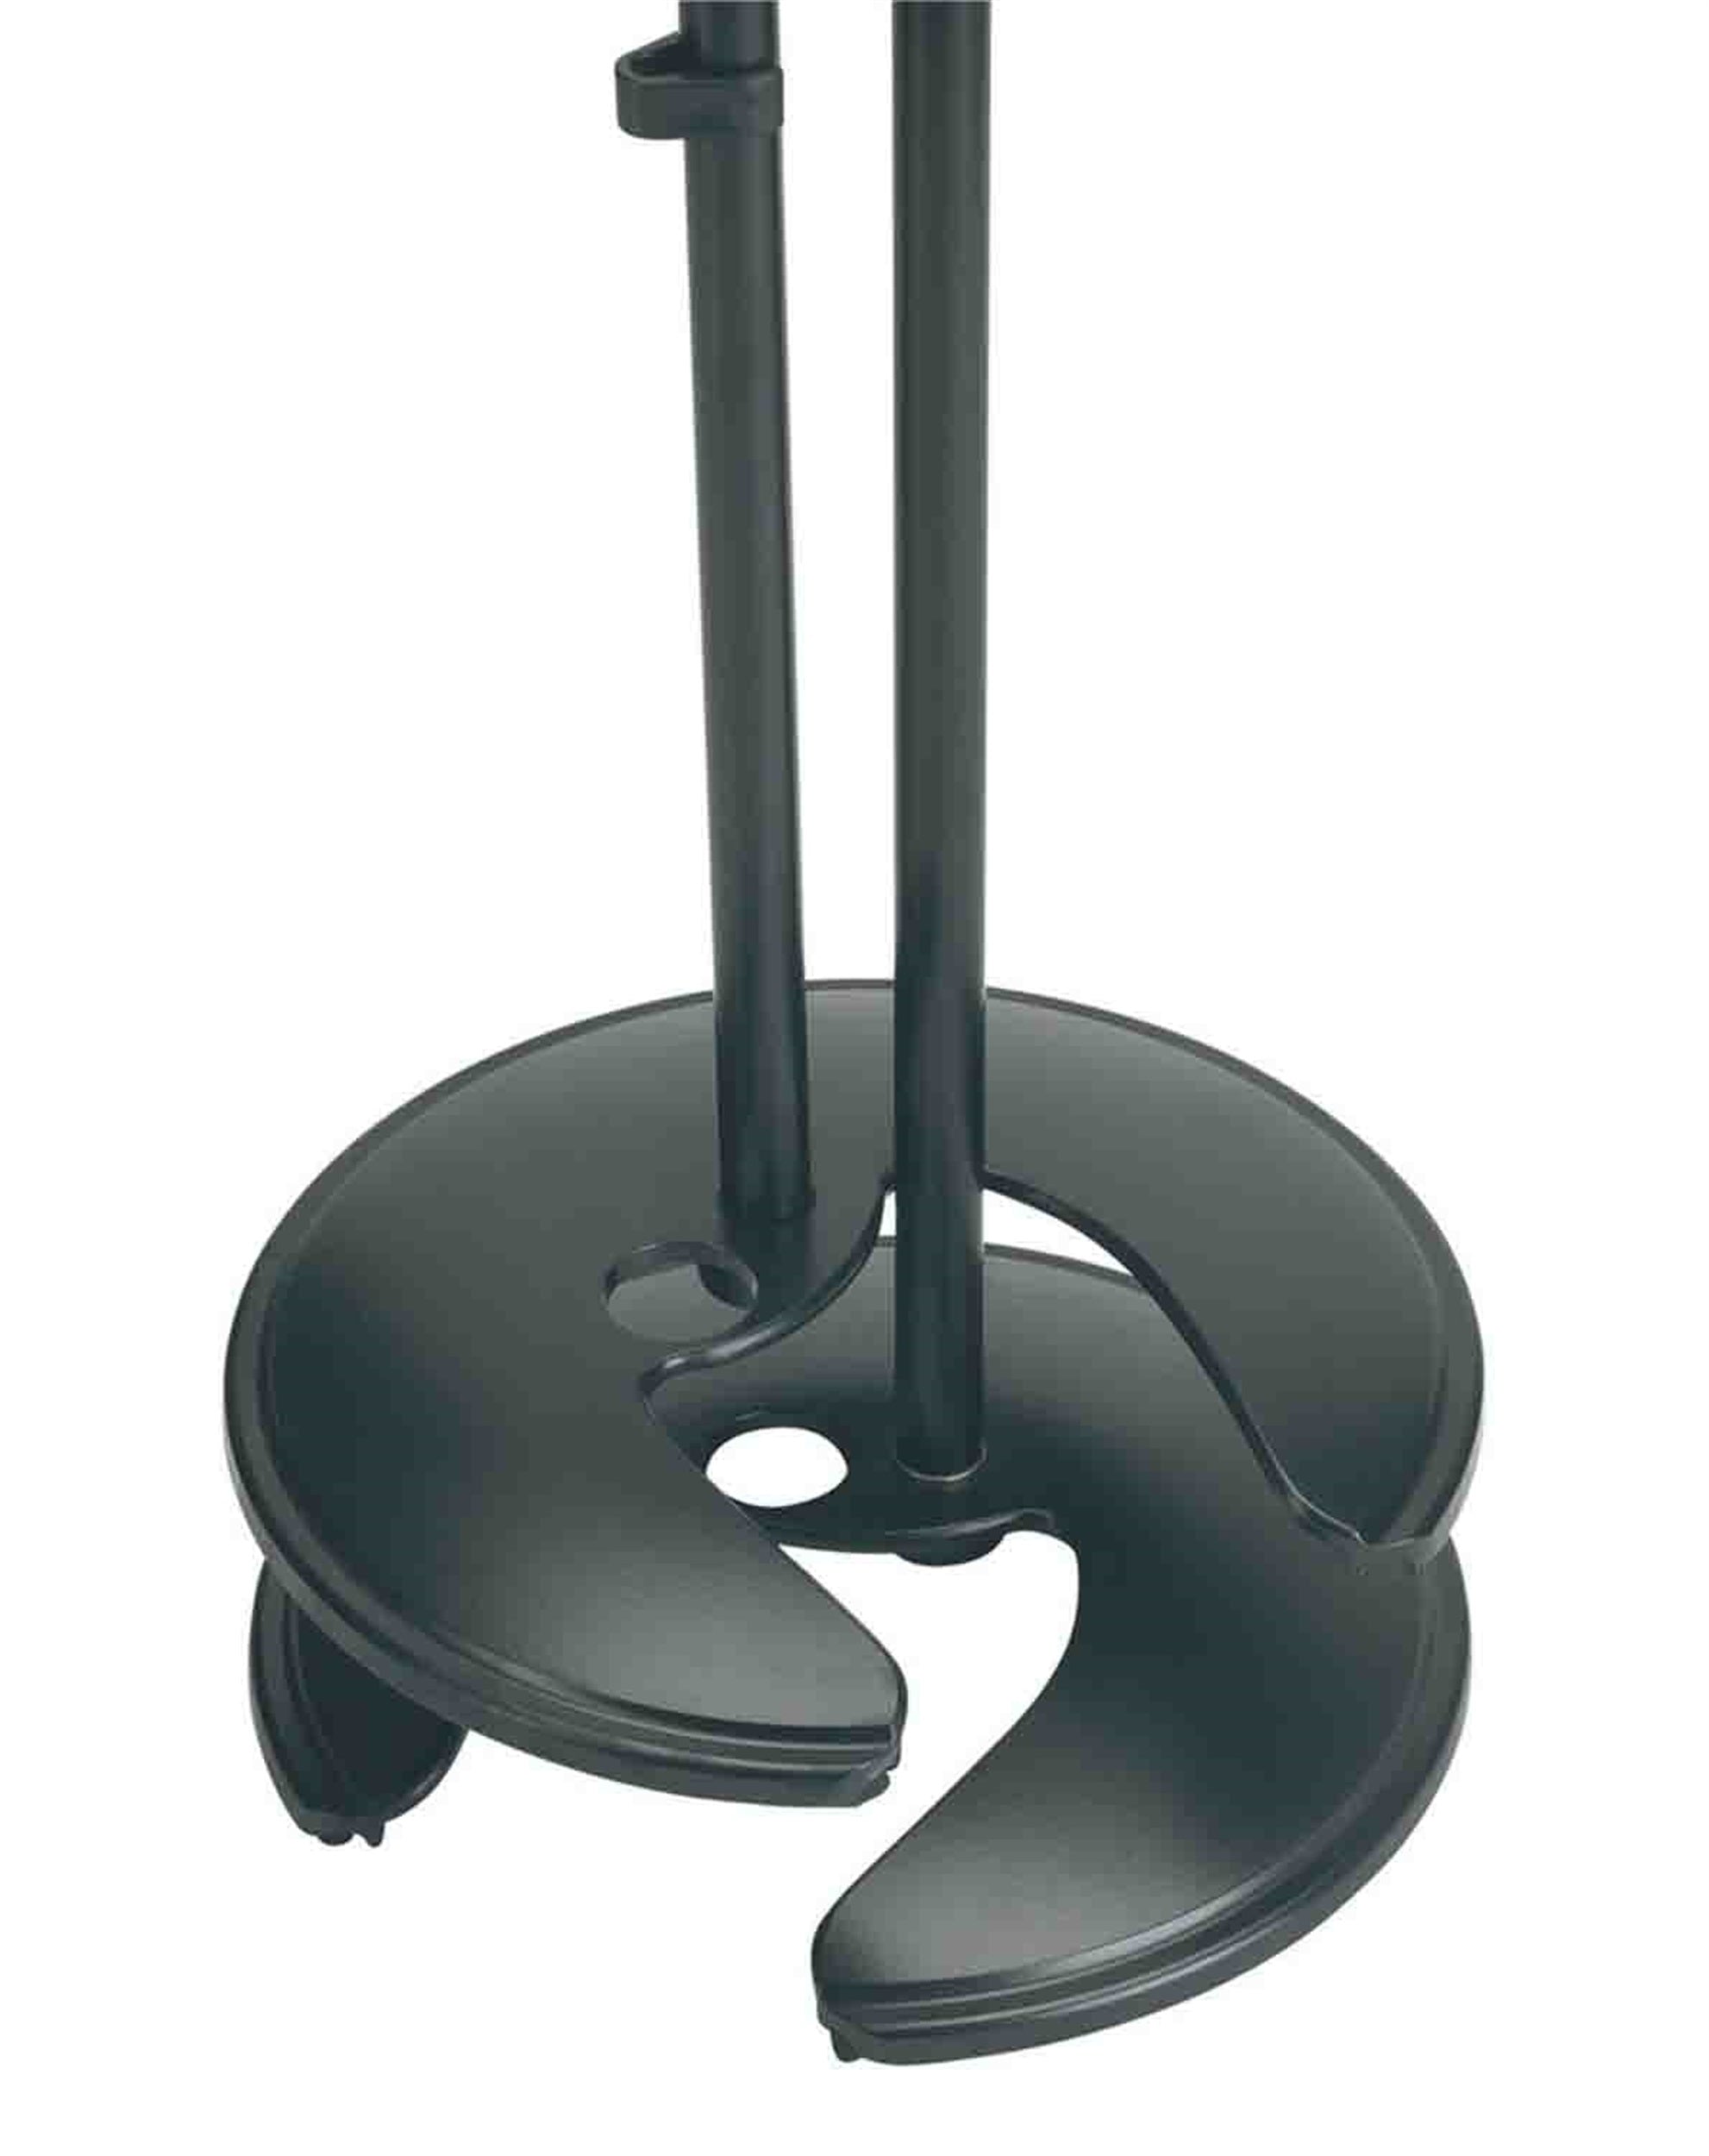 K&M Stackable Round-base Microphone Stand K&M